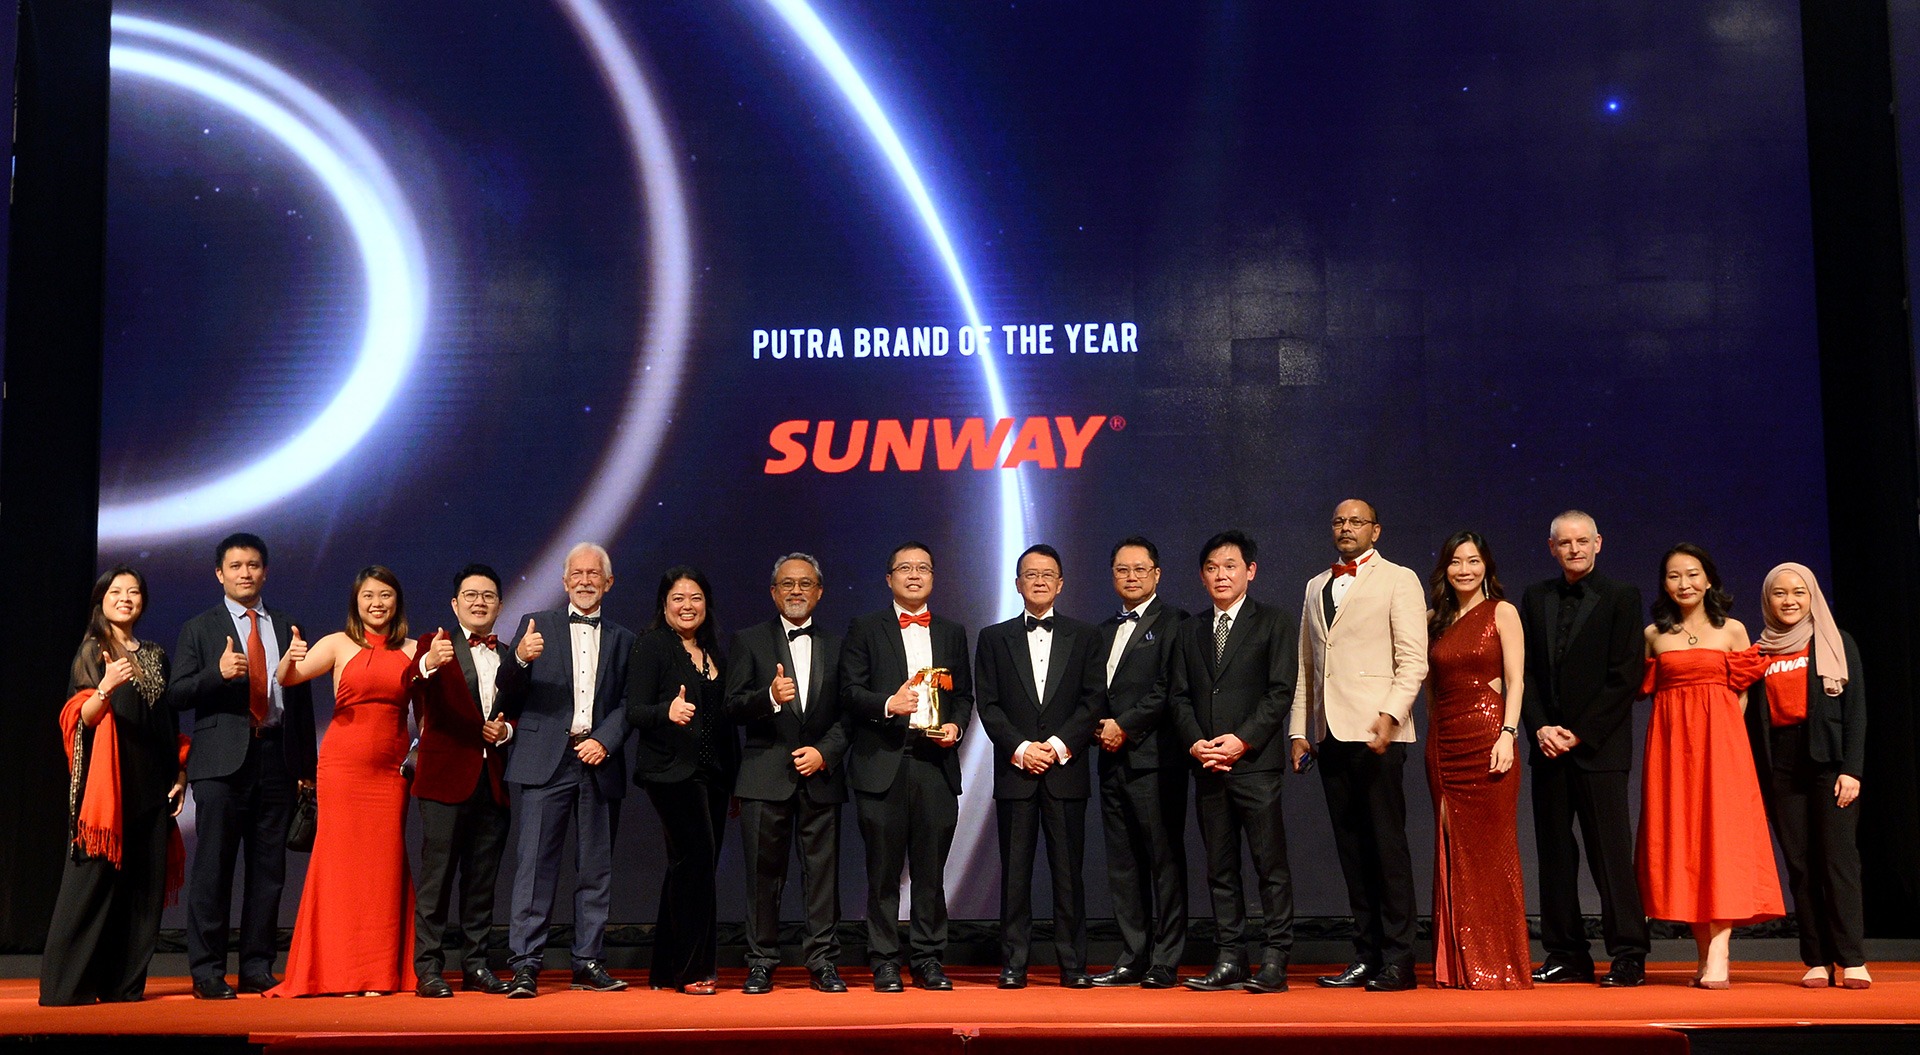 Sunway Named Brand of the Year at Putra Brand Awards 2022